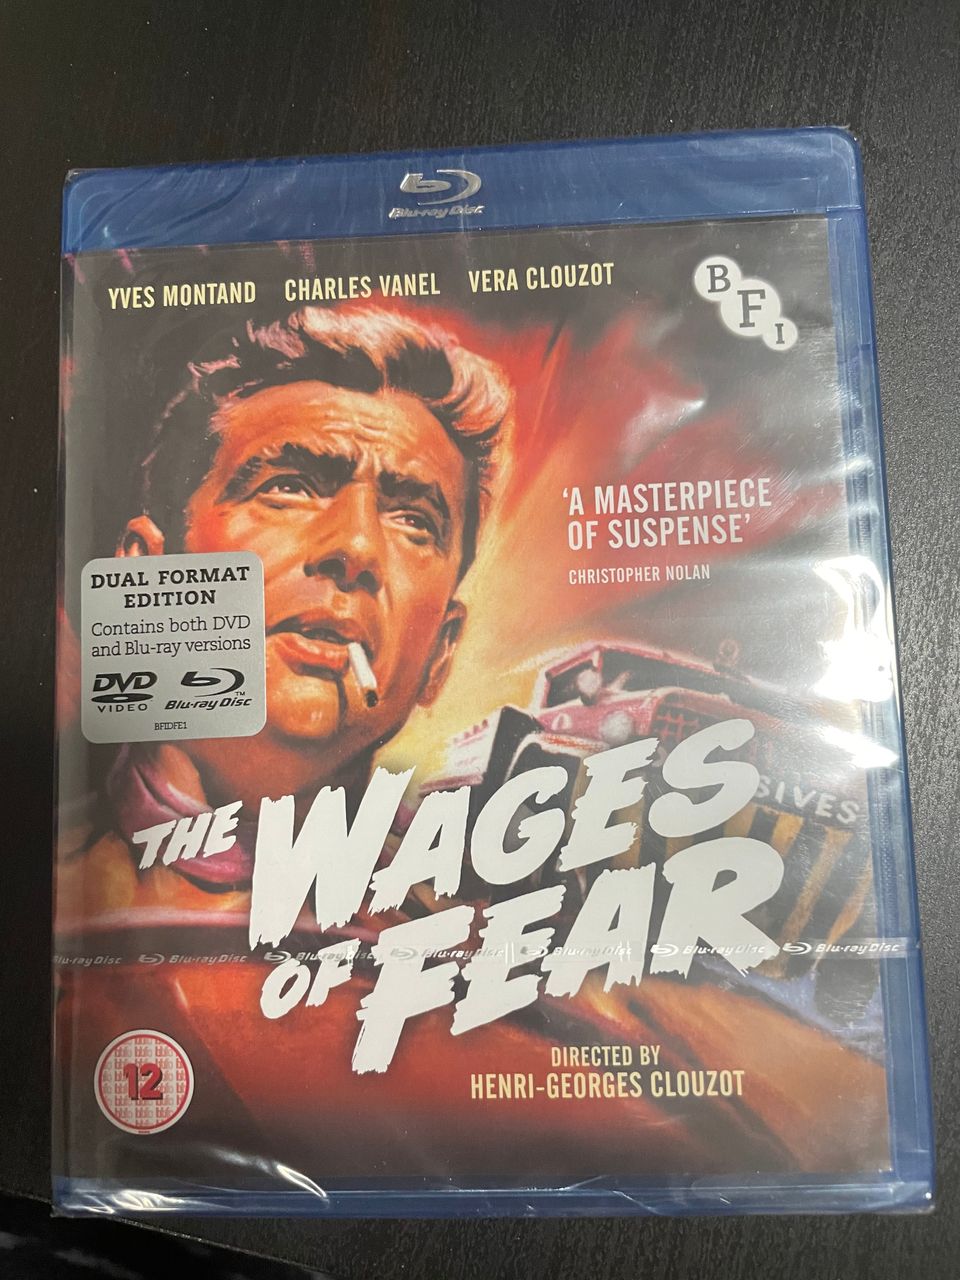 The Wages of Fear bluray&DVD